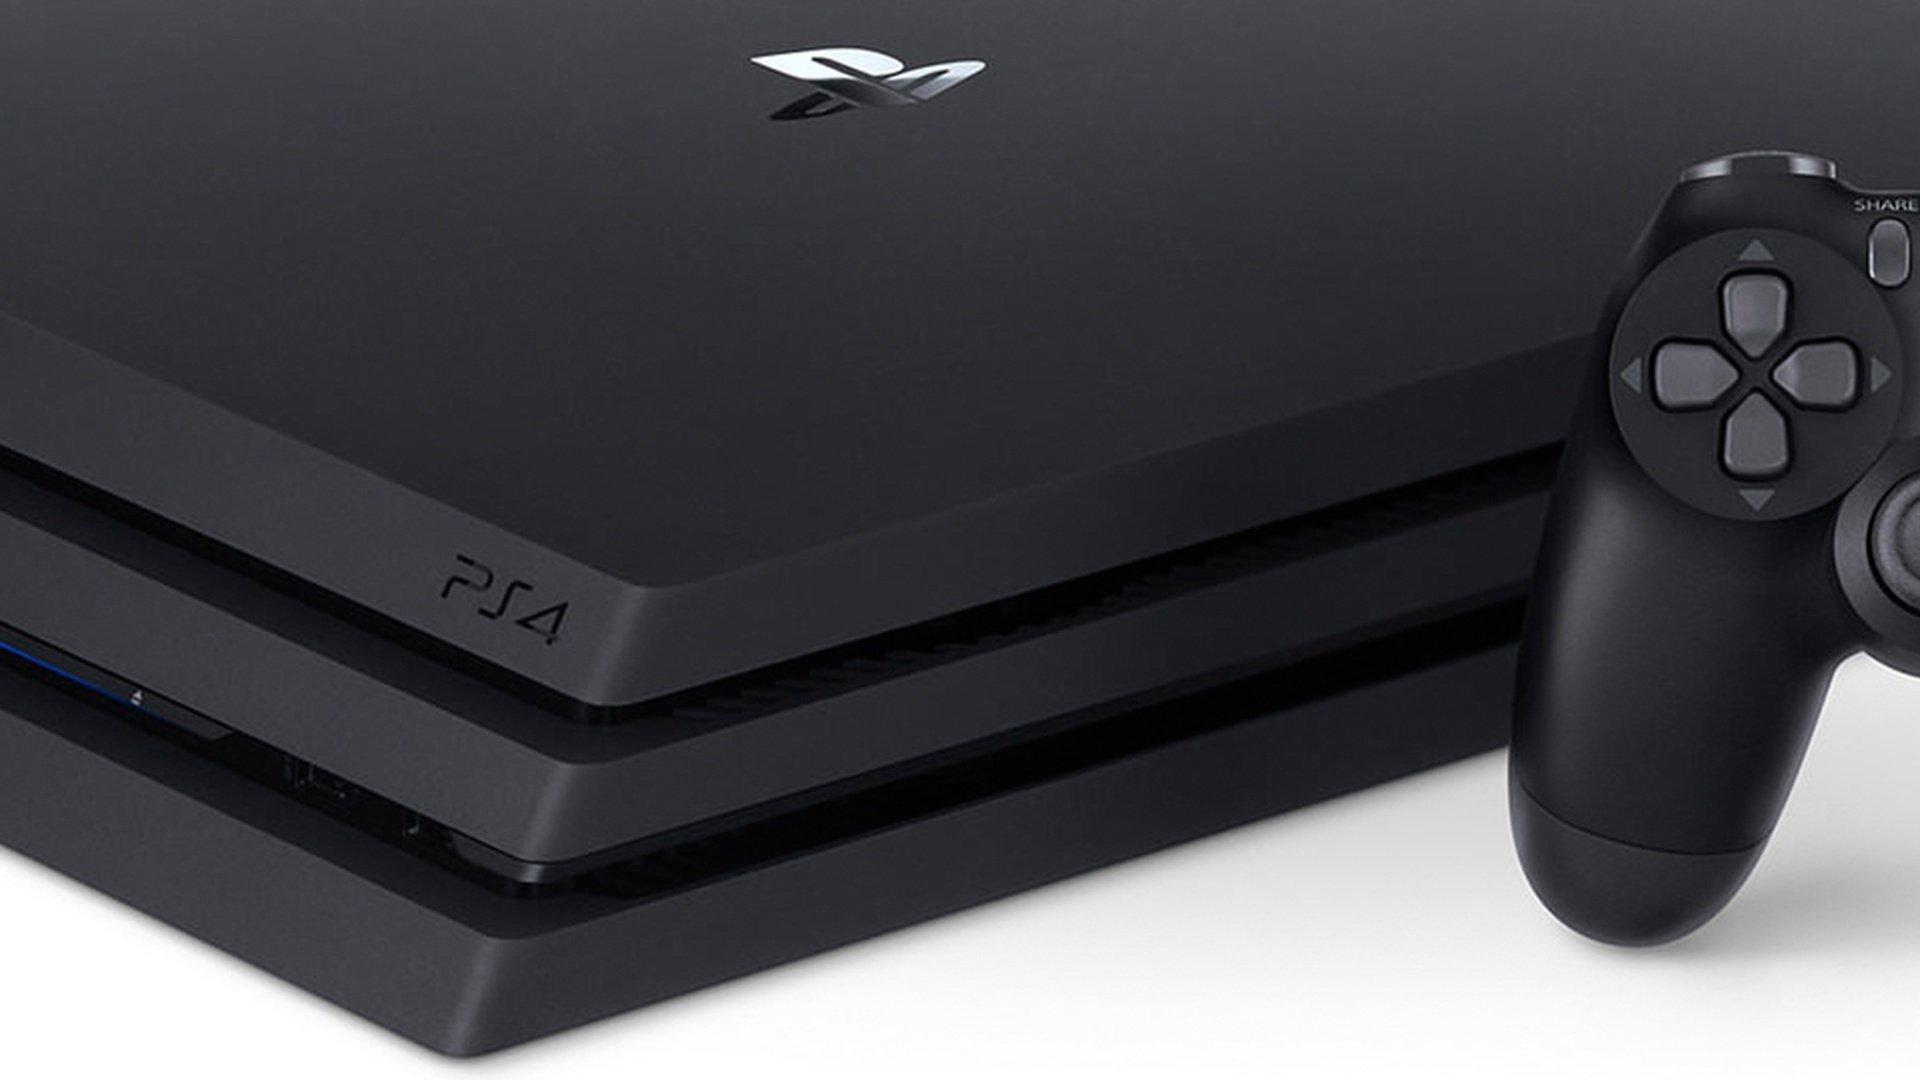 Sony will discontinue several PS4 models, according to a Japanese retailer